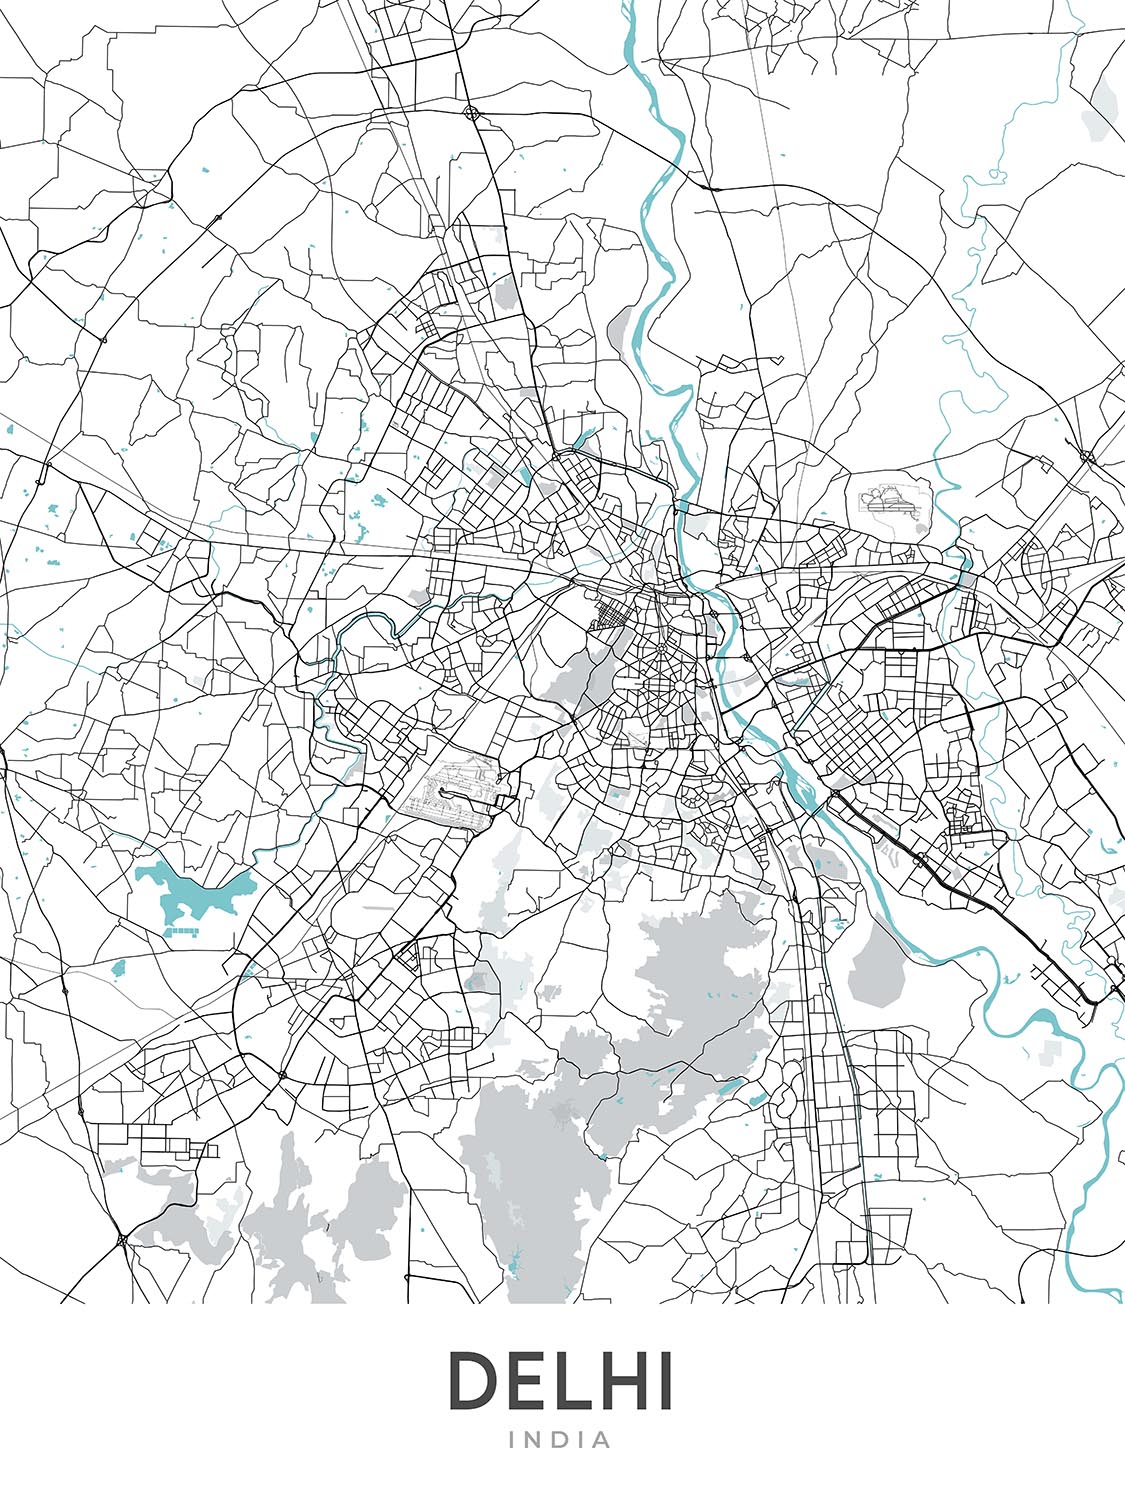 Modern City Map of Delhi, India: Connaught Place, India Gate, Red Fort, NH 44, Ring Road